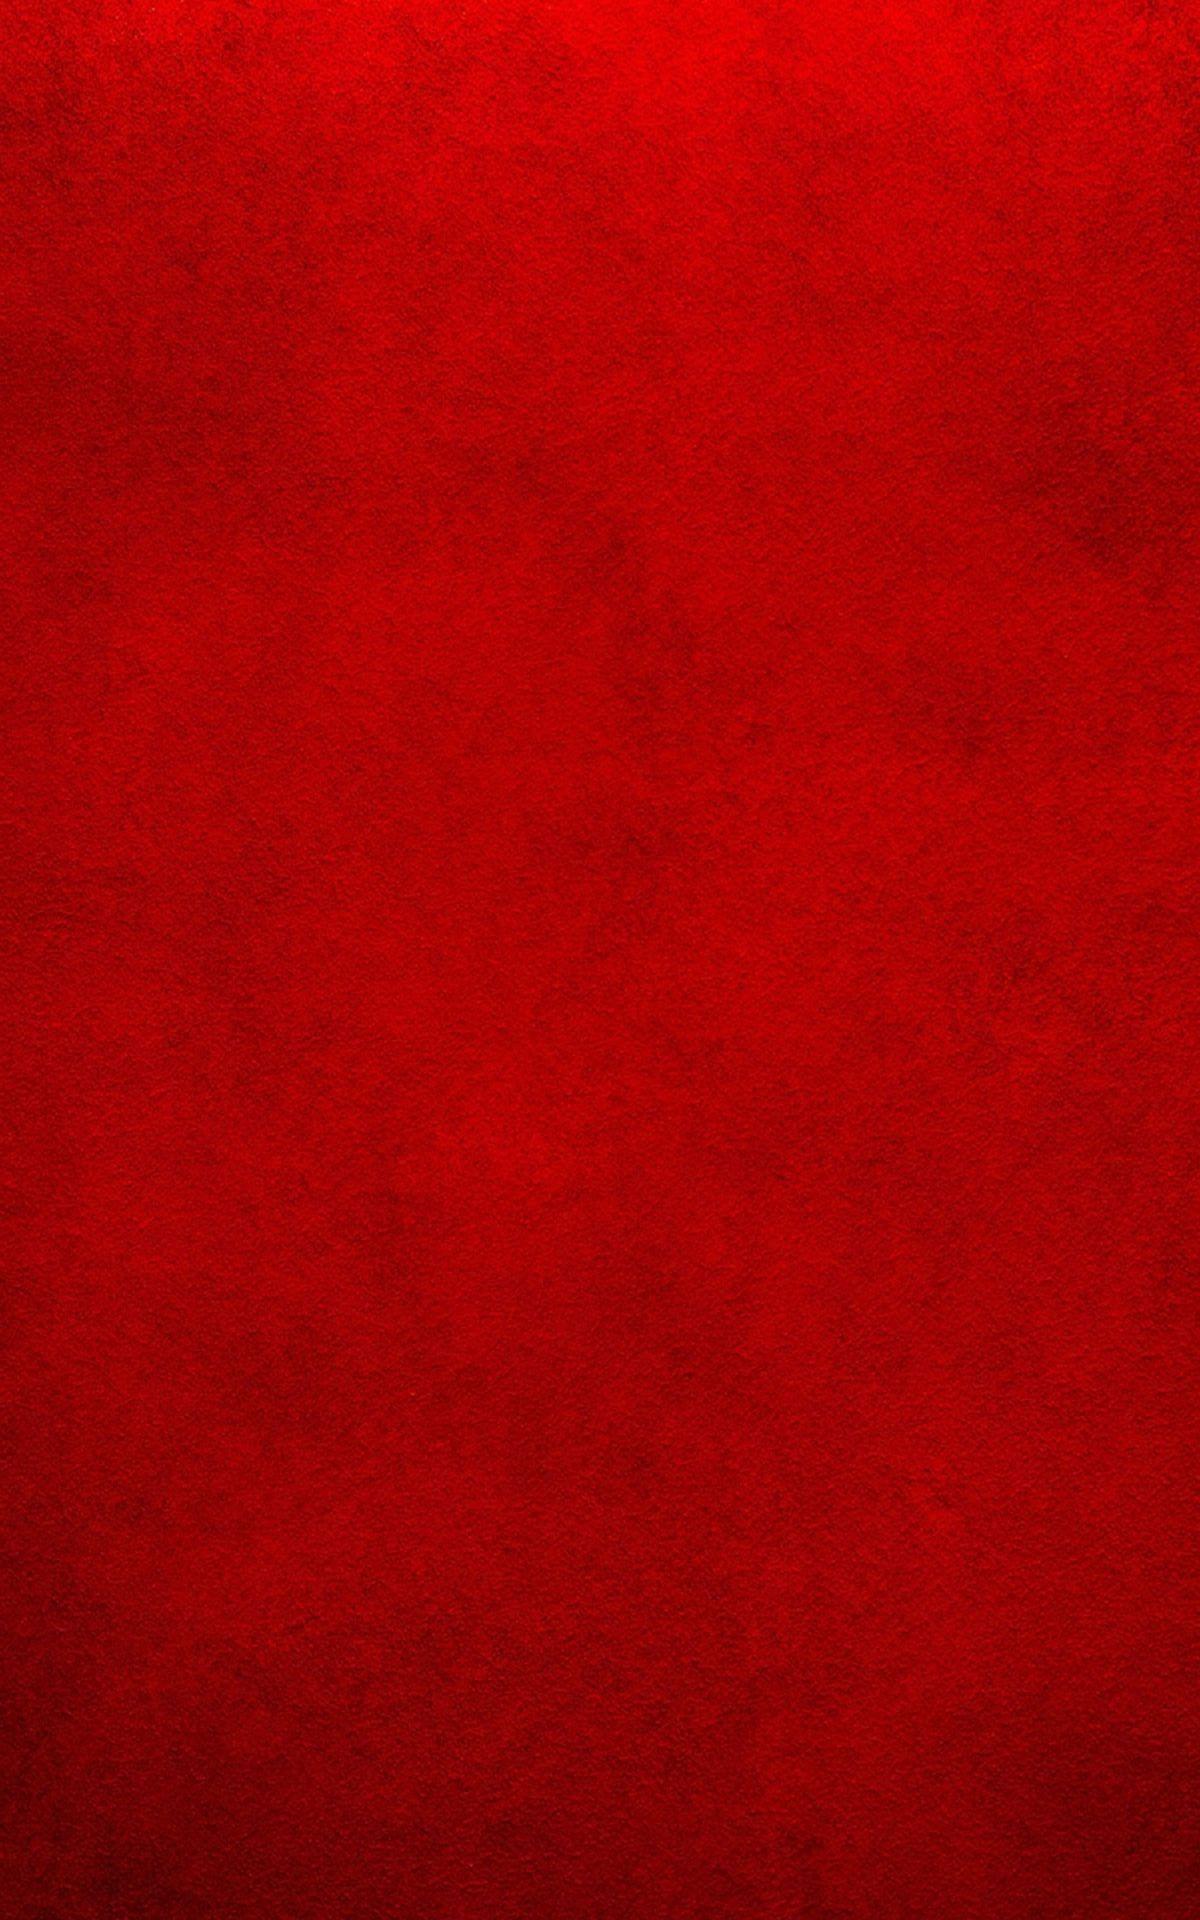 Red Wallpaper iPhone. iPhoneWallpaper. iPhone red